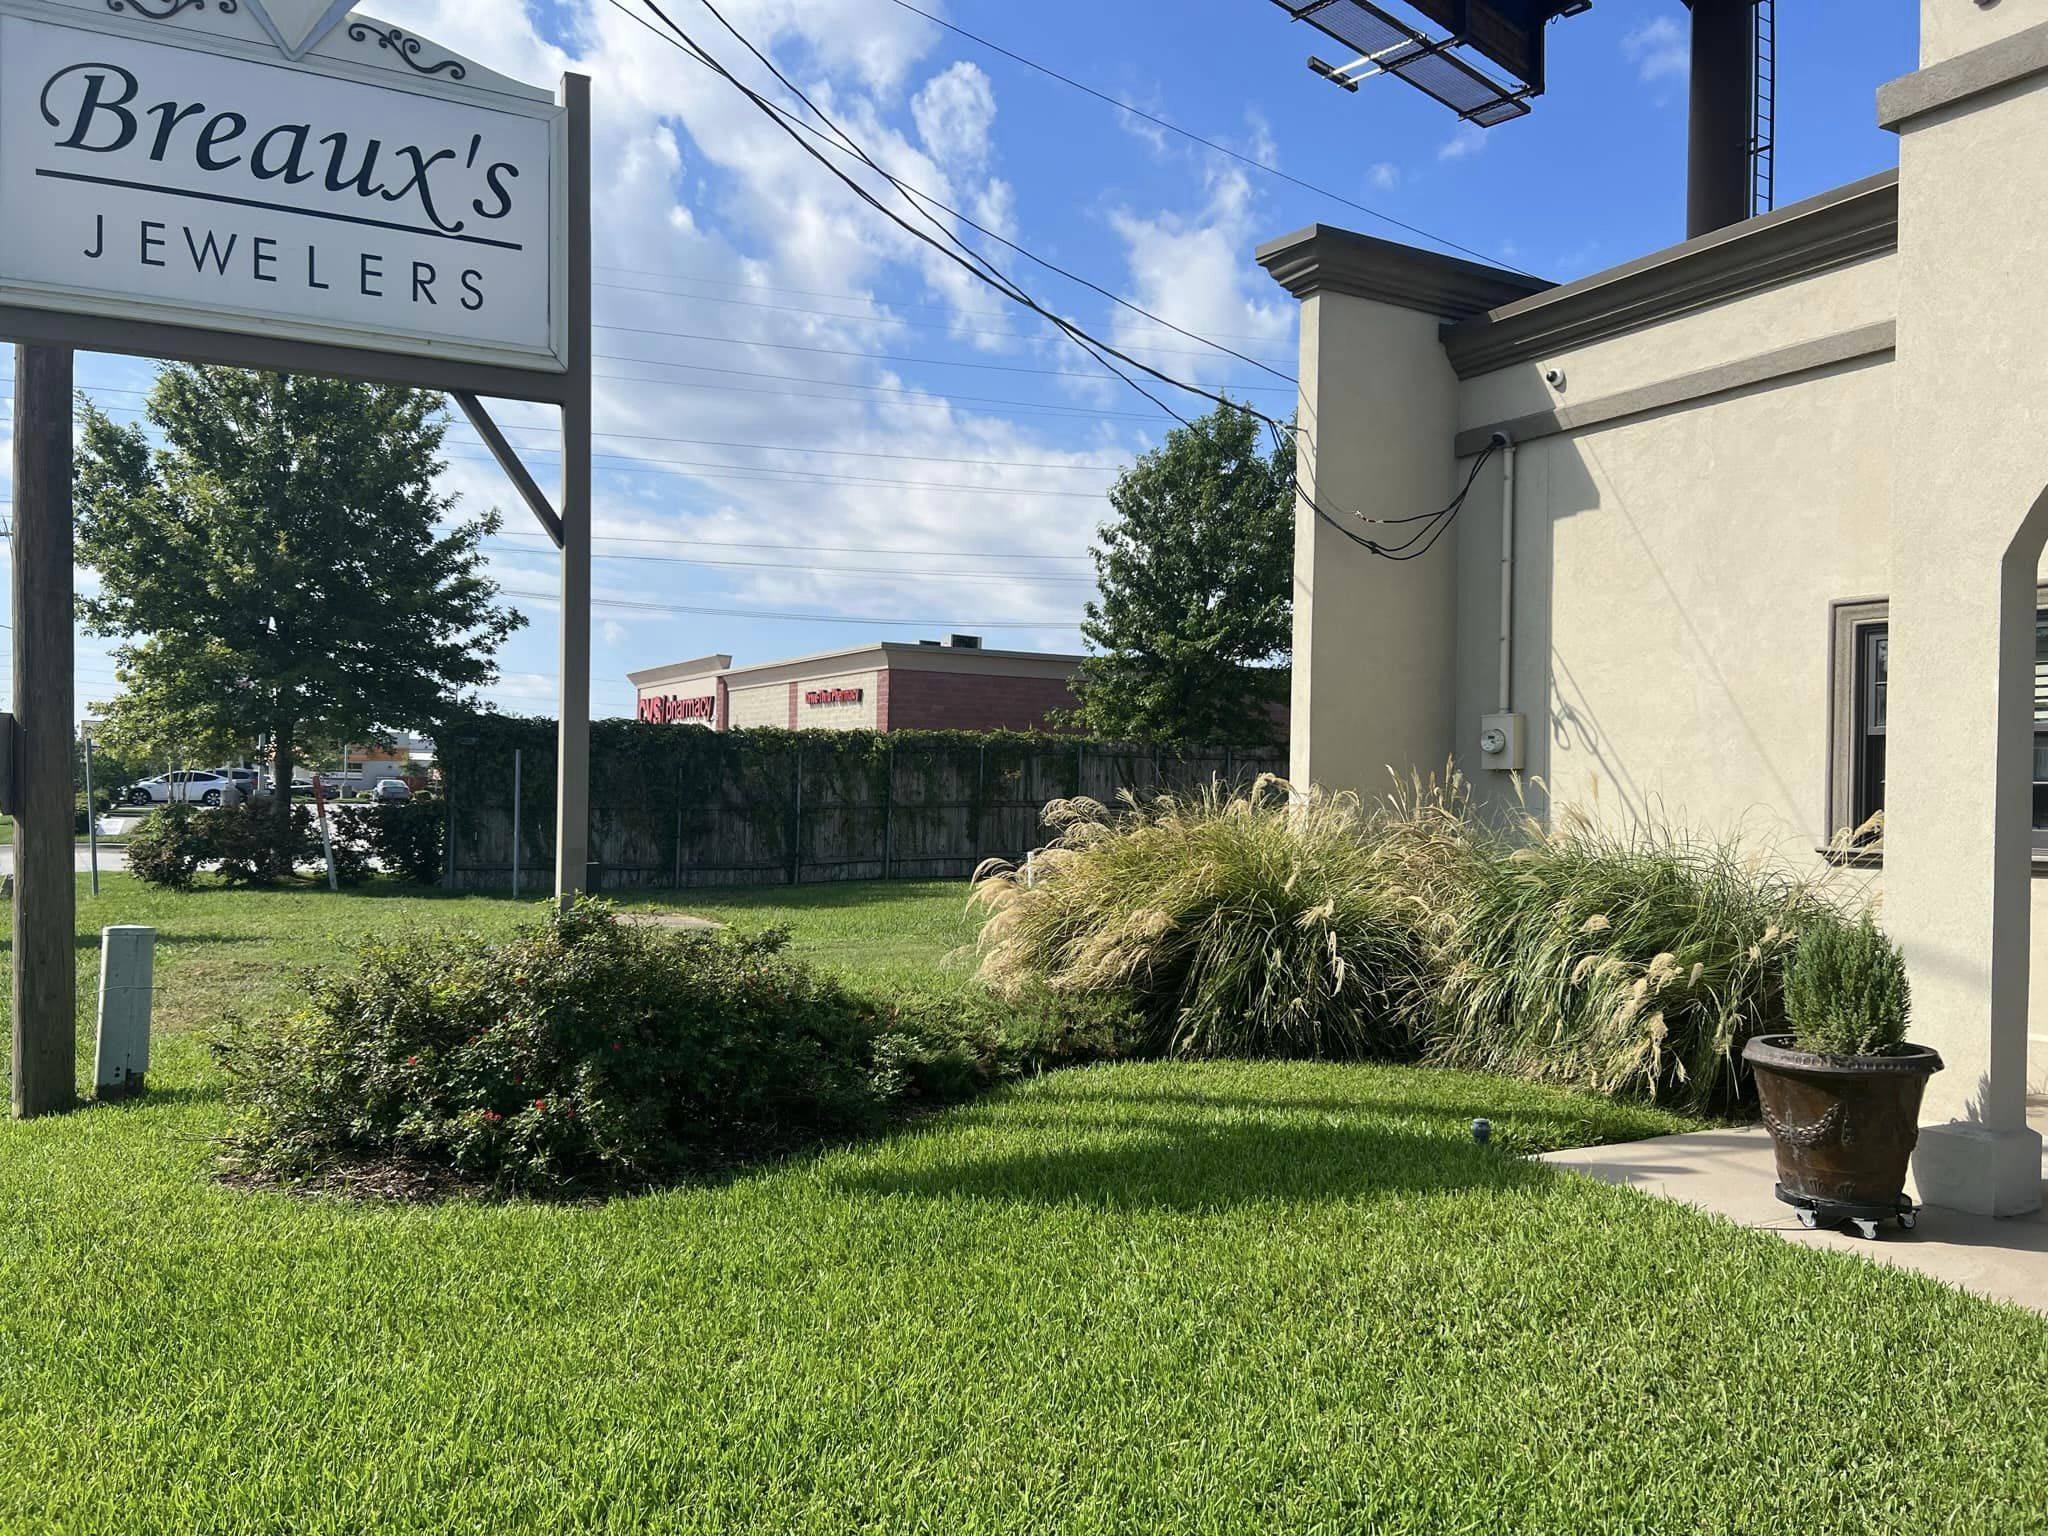 Overgrown grasses and shrubs in front of Breaux's Jewelers, awaiting a garden redesign to enhance the commercial storefront's appeal.